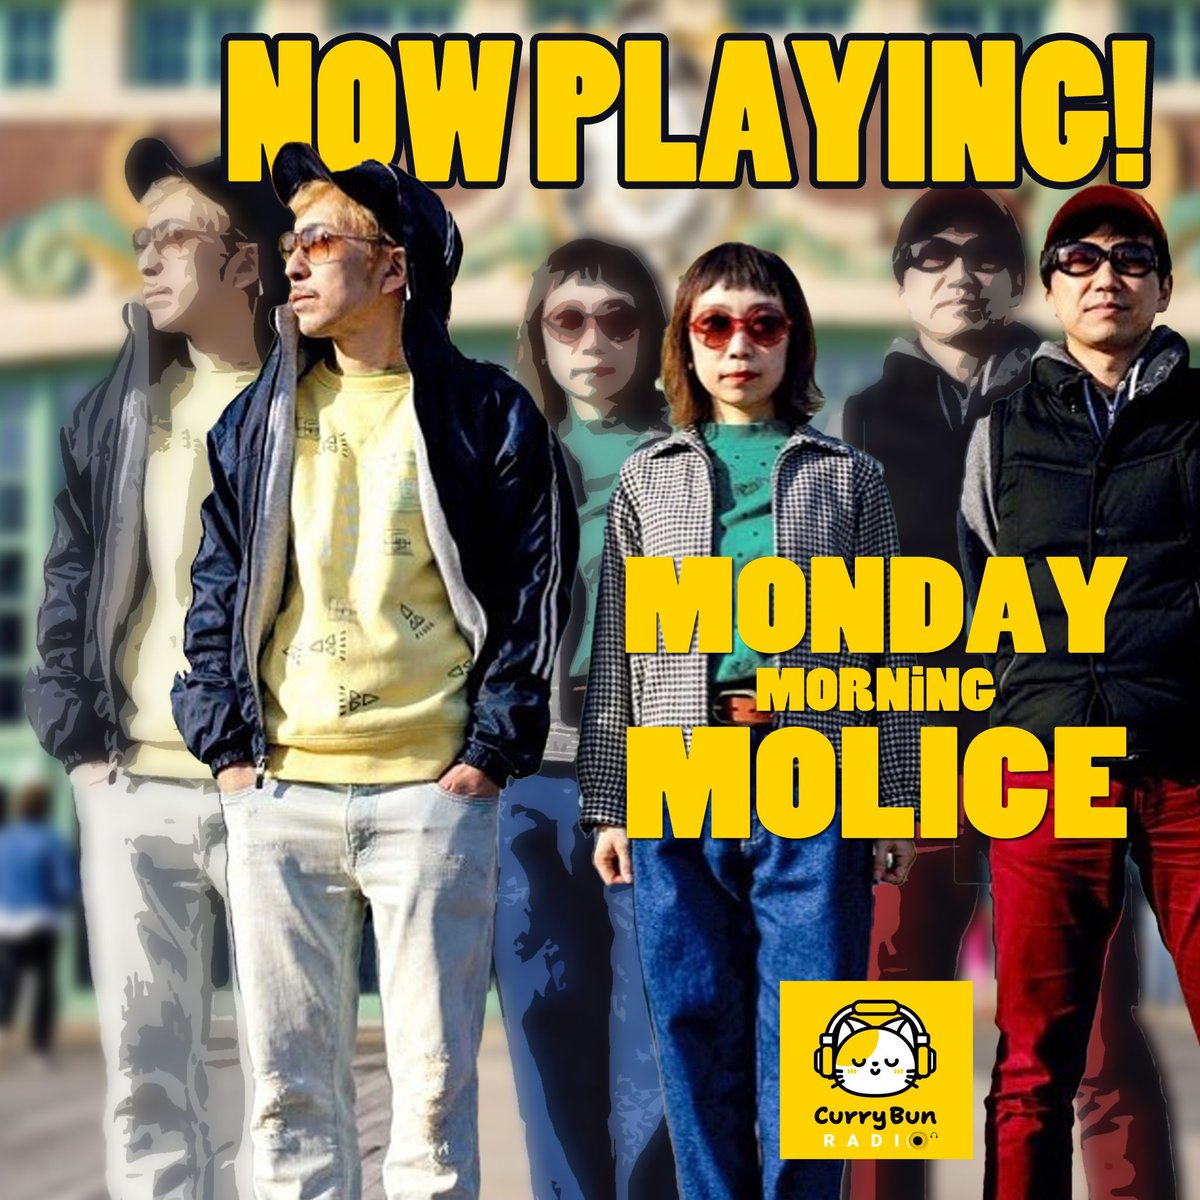 currybun.net/mmm
THIS IS HAPPENING! NOW!

Monday Morning Molice on #CurryBunRadio
Monday at 08:30 & 20:30 EST  (Mon. 22:30 & Tue. 10:30 JST)

#themolice #postpunk #dancecore #jrock